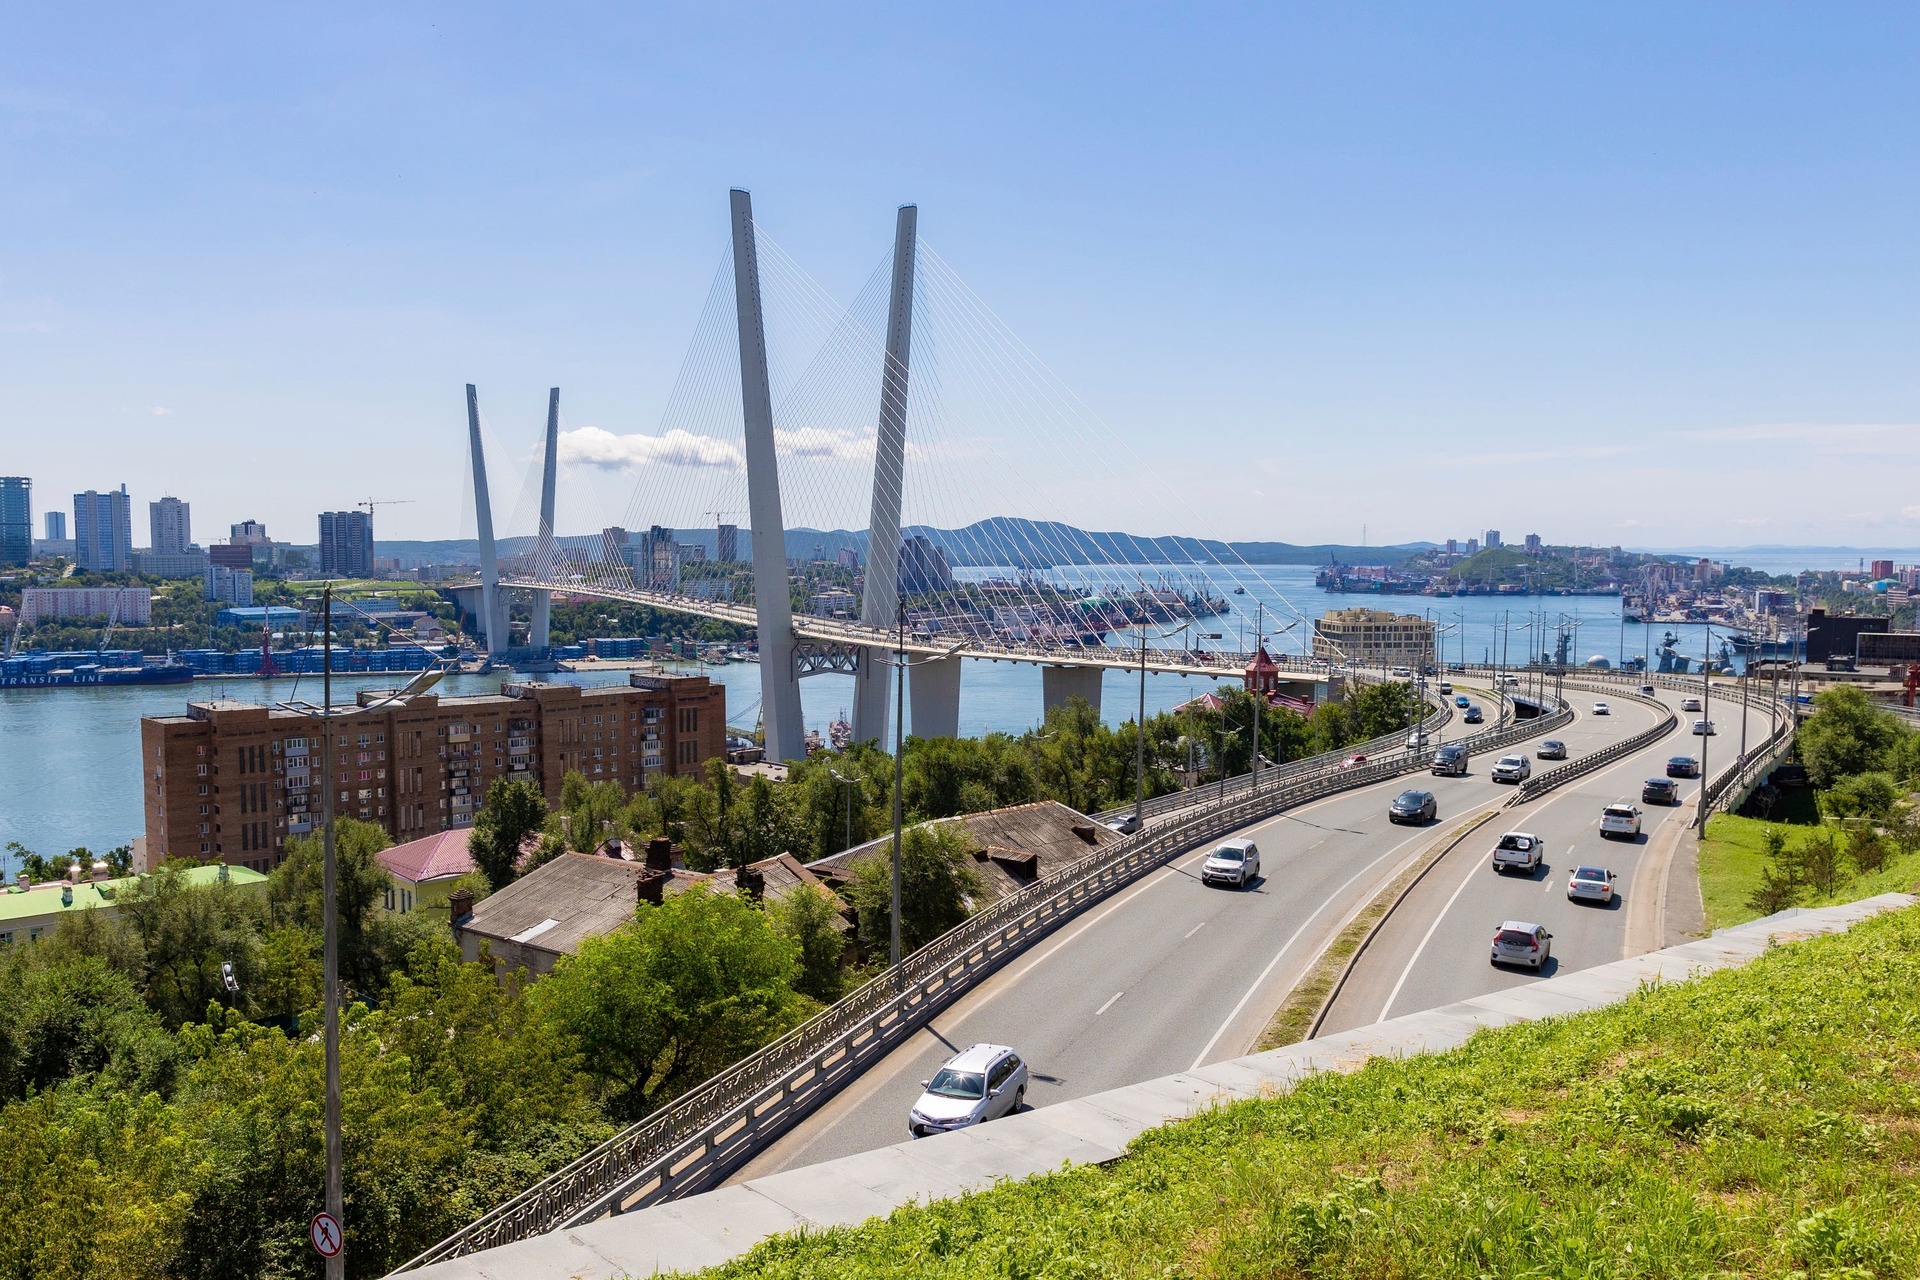 Vladivostok is thought to be a venue for the meeting between the two leaders.